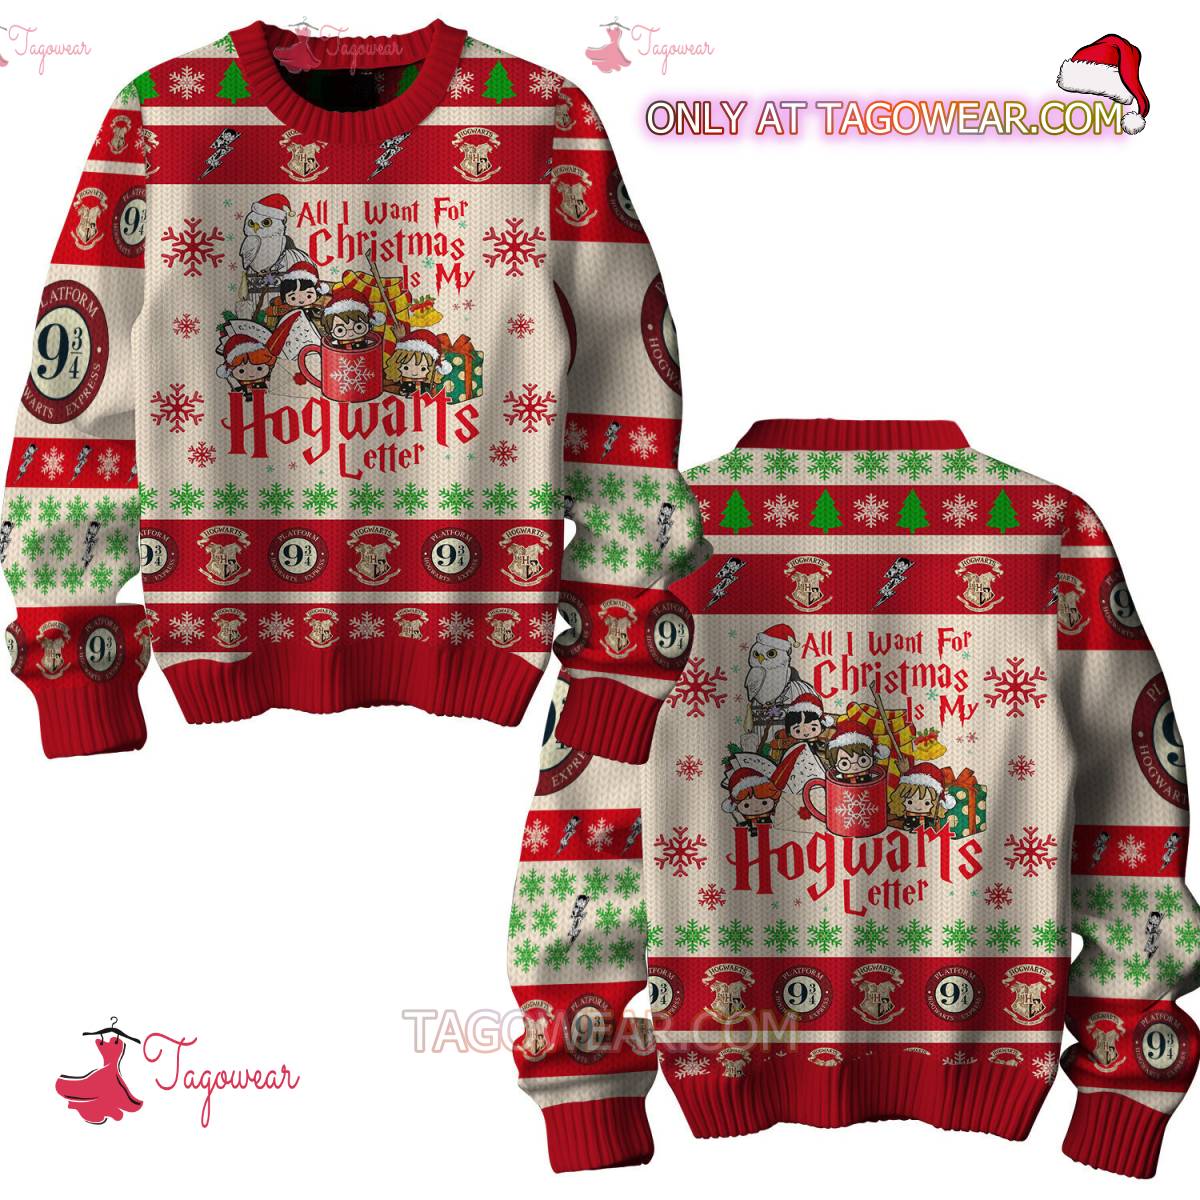 All I Want For Christmas Is Hogwarts Letter Ugly Christmas Sweater